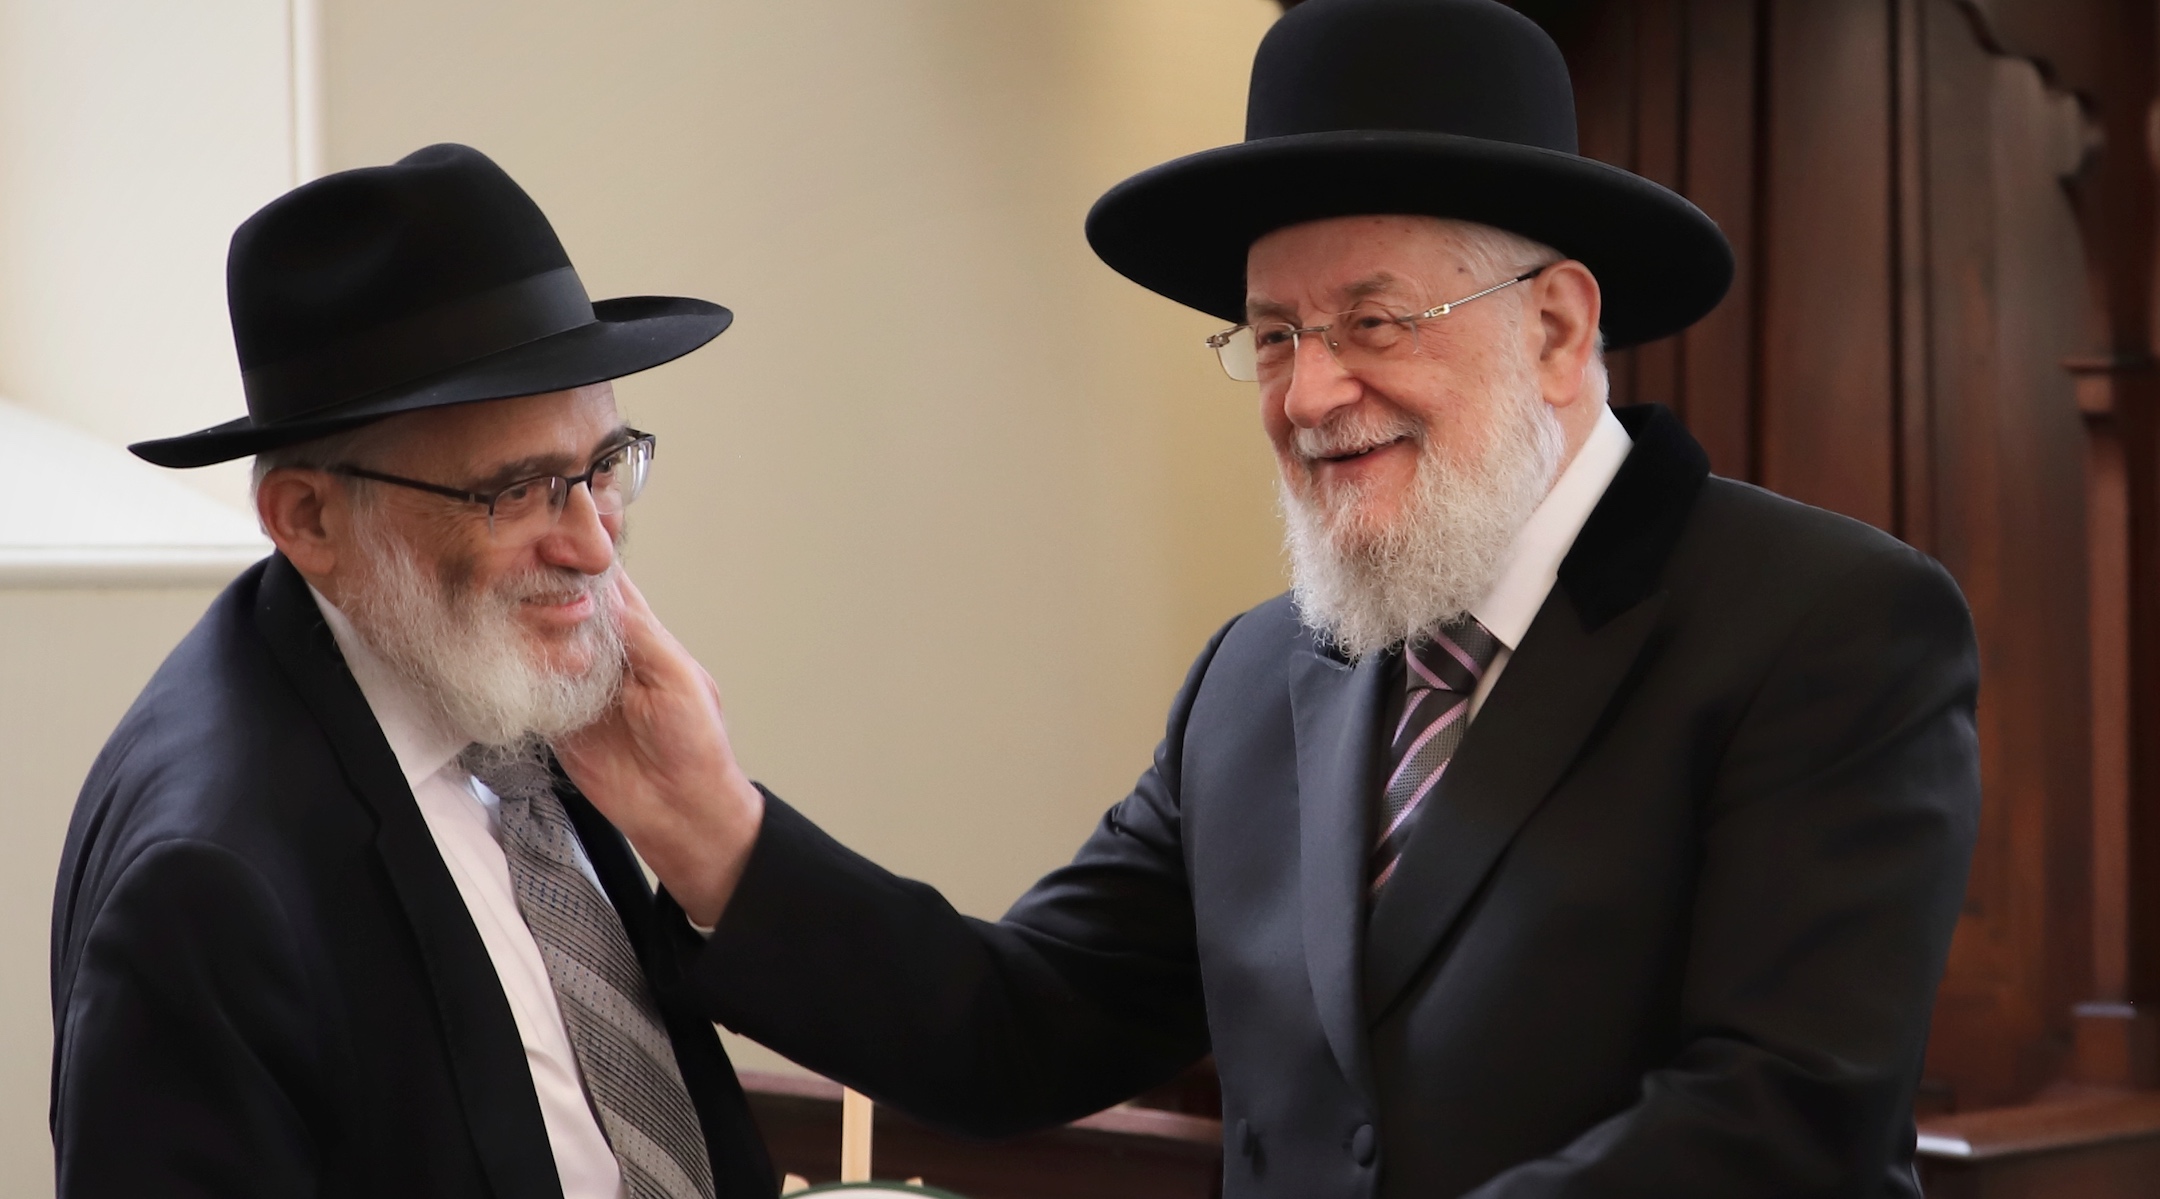 Lau shown with Joseph Gutnick, left, a mining magnate who is funding a renovation of the synagogue. (Mishka Gora)